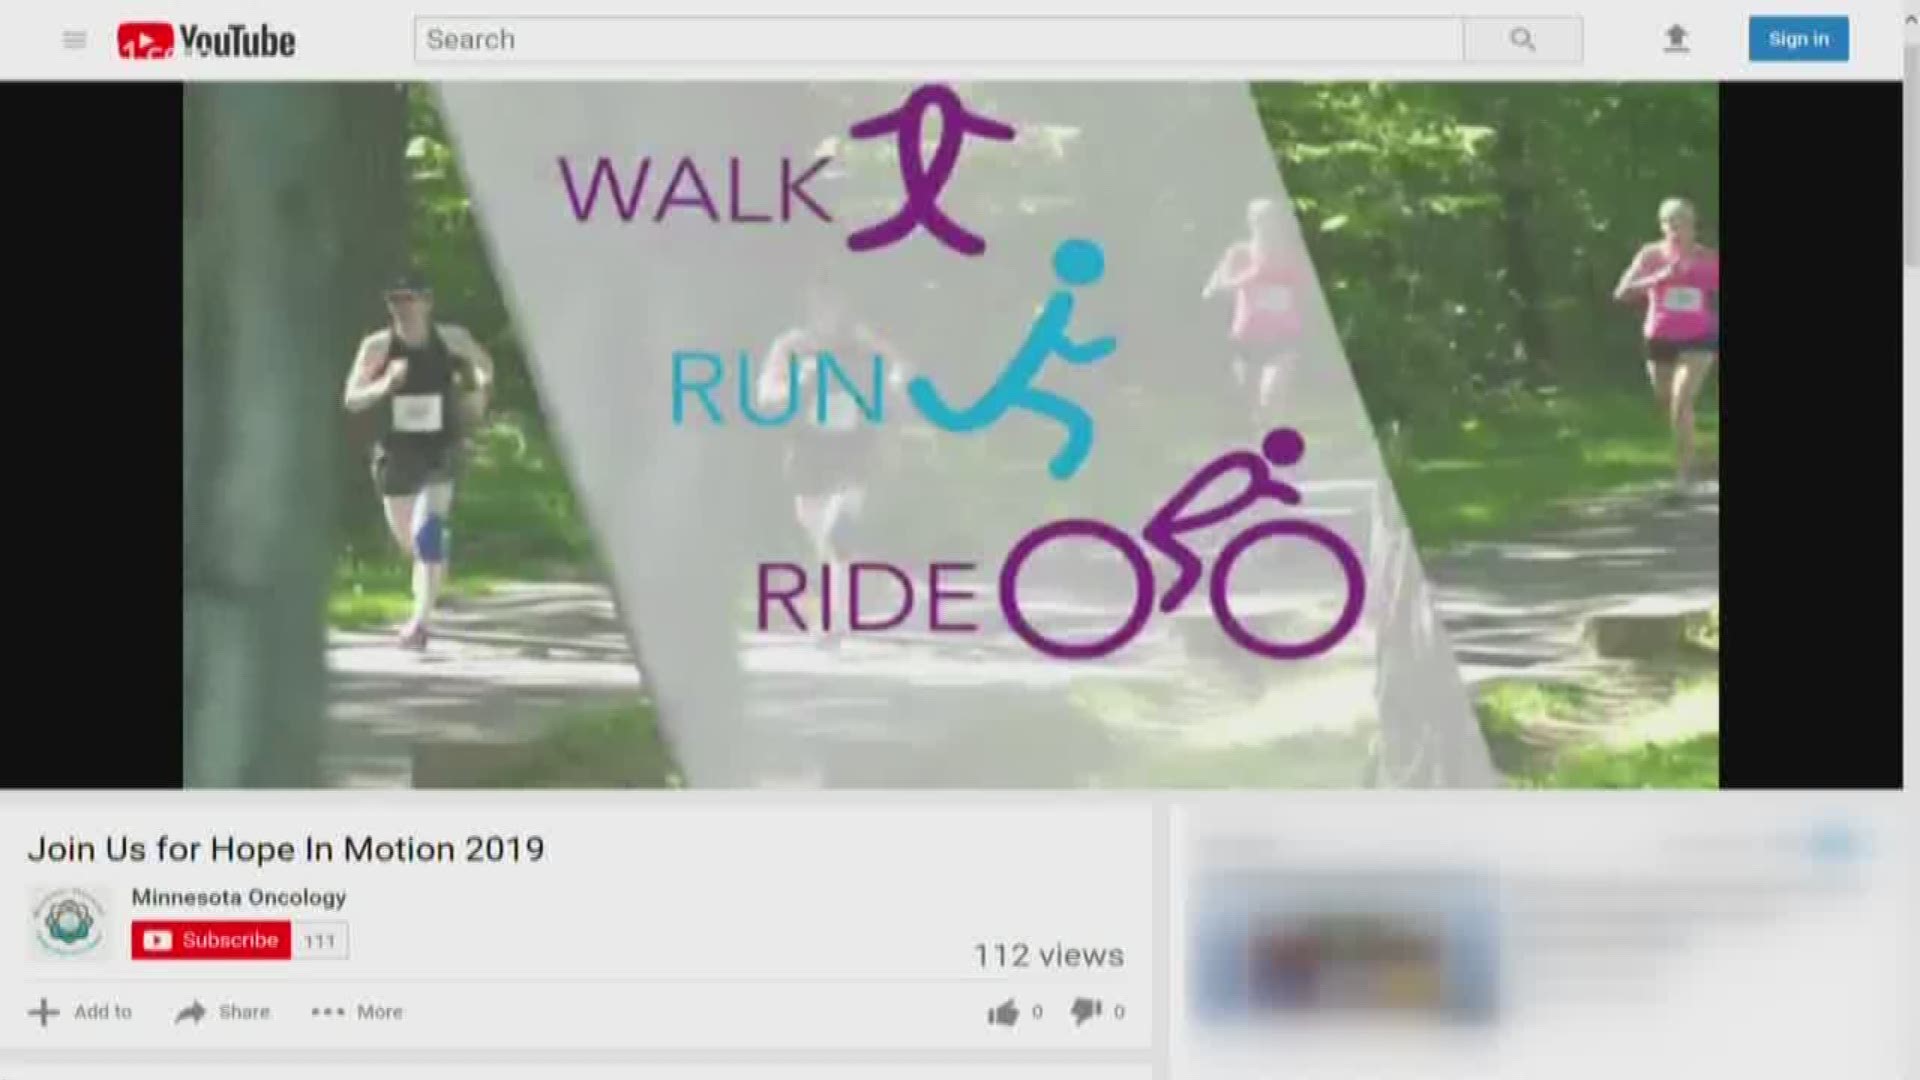 A thousand people are expected to participate in the Sixth Annual Hope in Motion Walk, Run and Ride, presented by Minnesota Oncology, at Sky Hill Park in Eagan on Saturday, June 22.